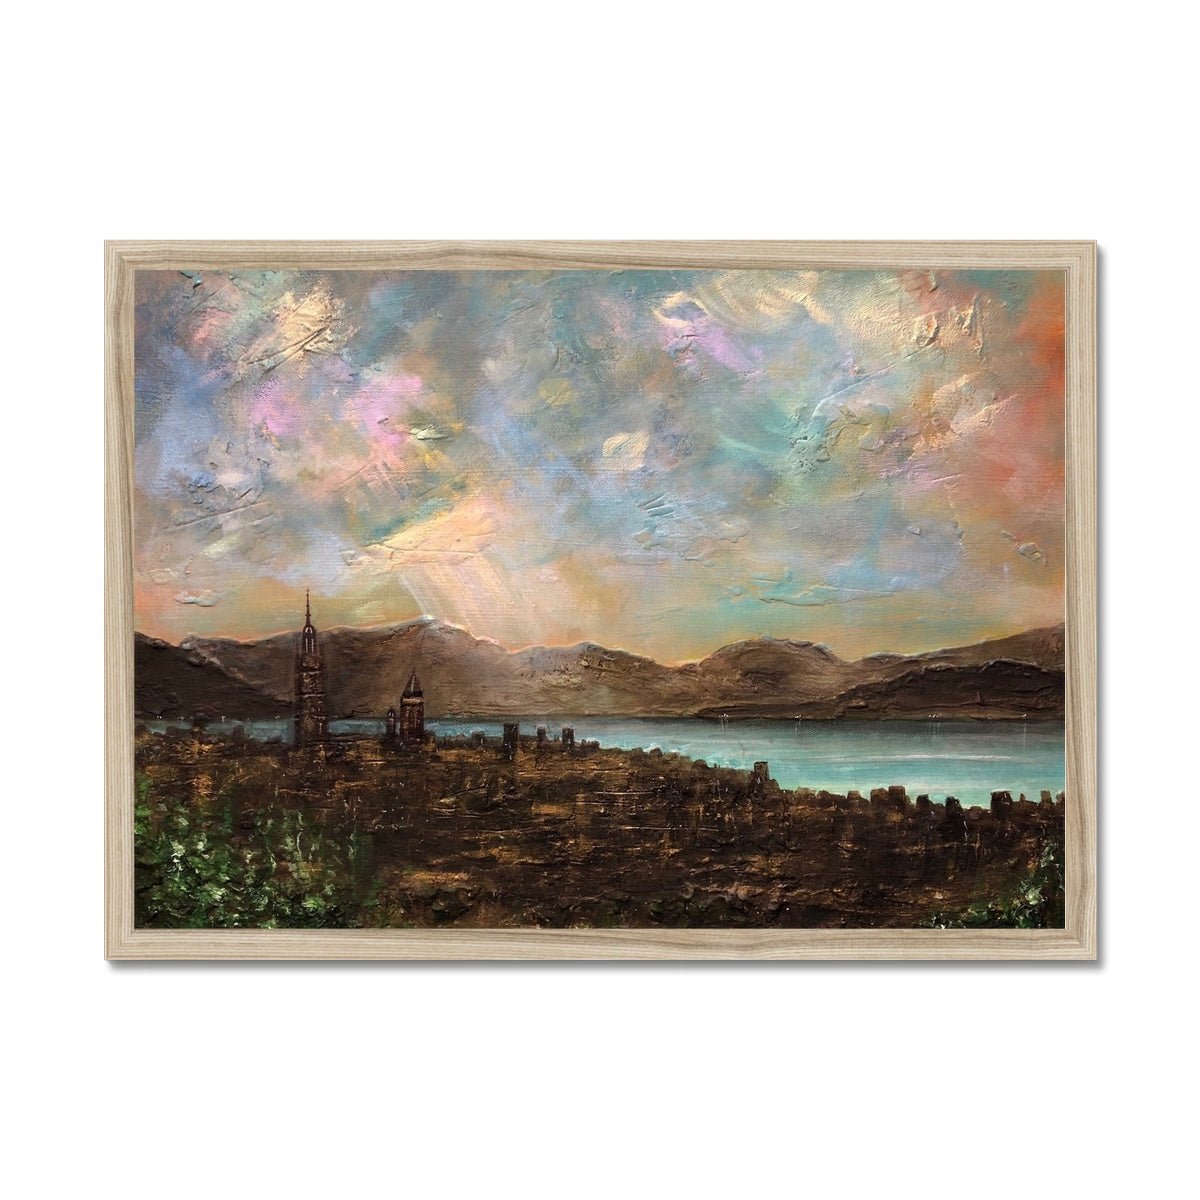 Angels Fingers Over Greenock Painting | Framed Prints From Scotland-Framed Prints-River Clyde Art Gallery-A2 Landscape-Natural Frame-Paintings, Prints, Homeware, Art Gifts From Scotland By Scottish Artist Kevin Hunter